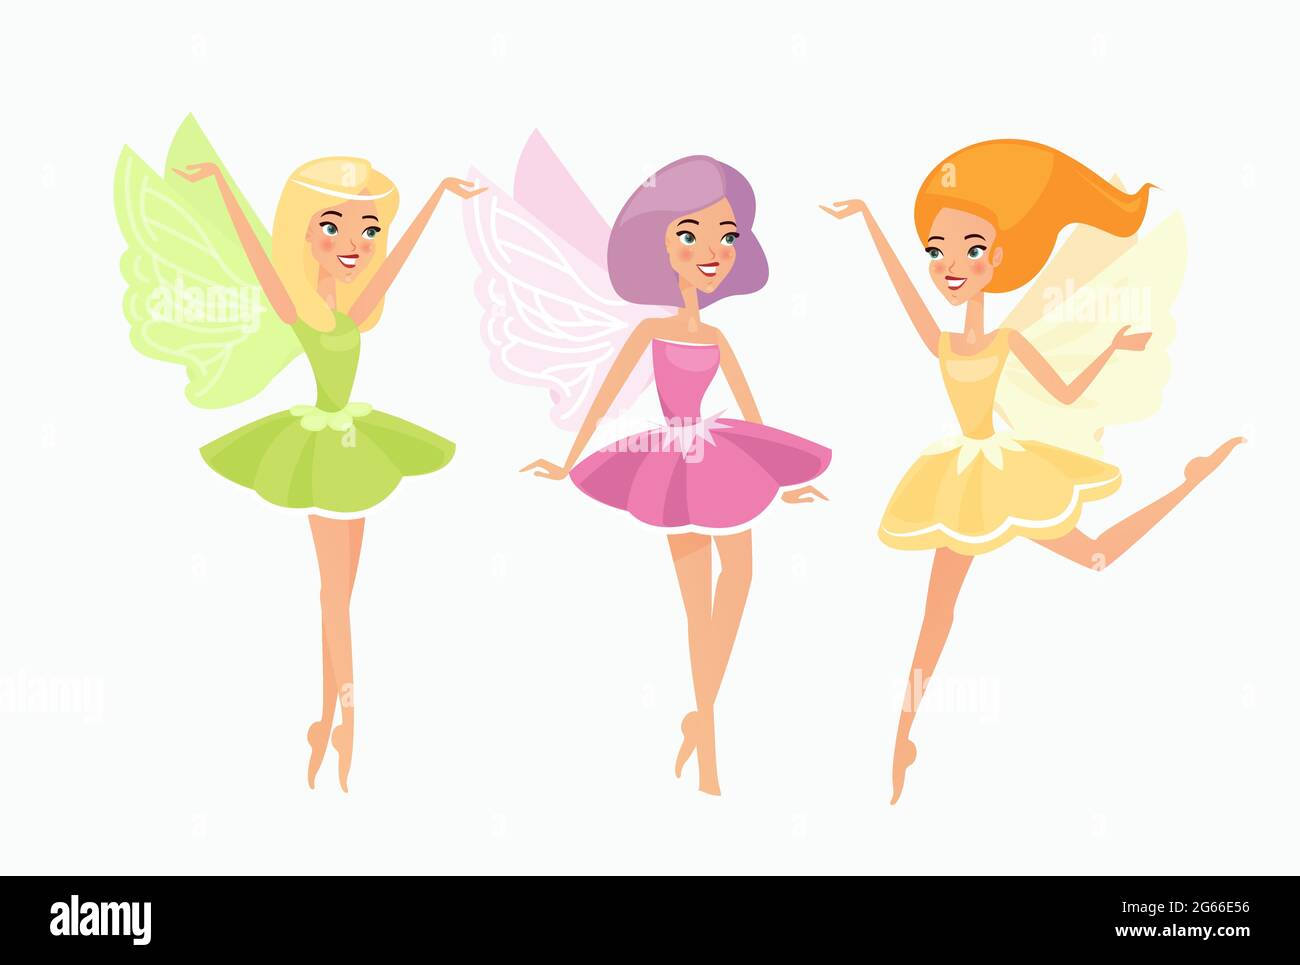 Magic fairies flat vector illustrations set. Cute fairytale creatures isolated on white background. Mythical flying elves. Cartoon girls with wings Stock Vector